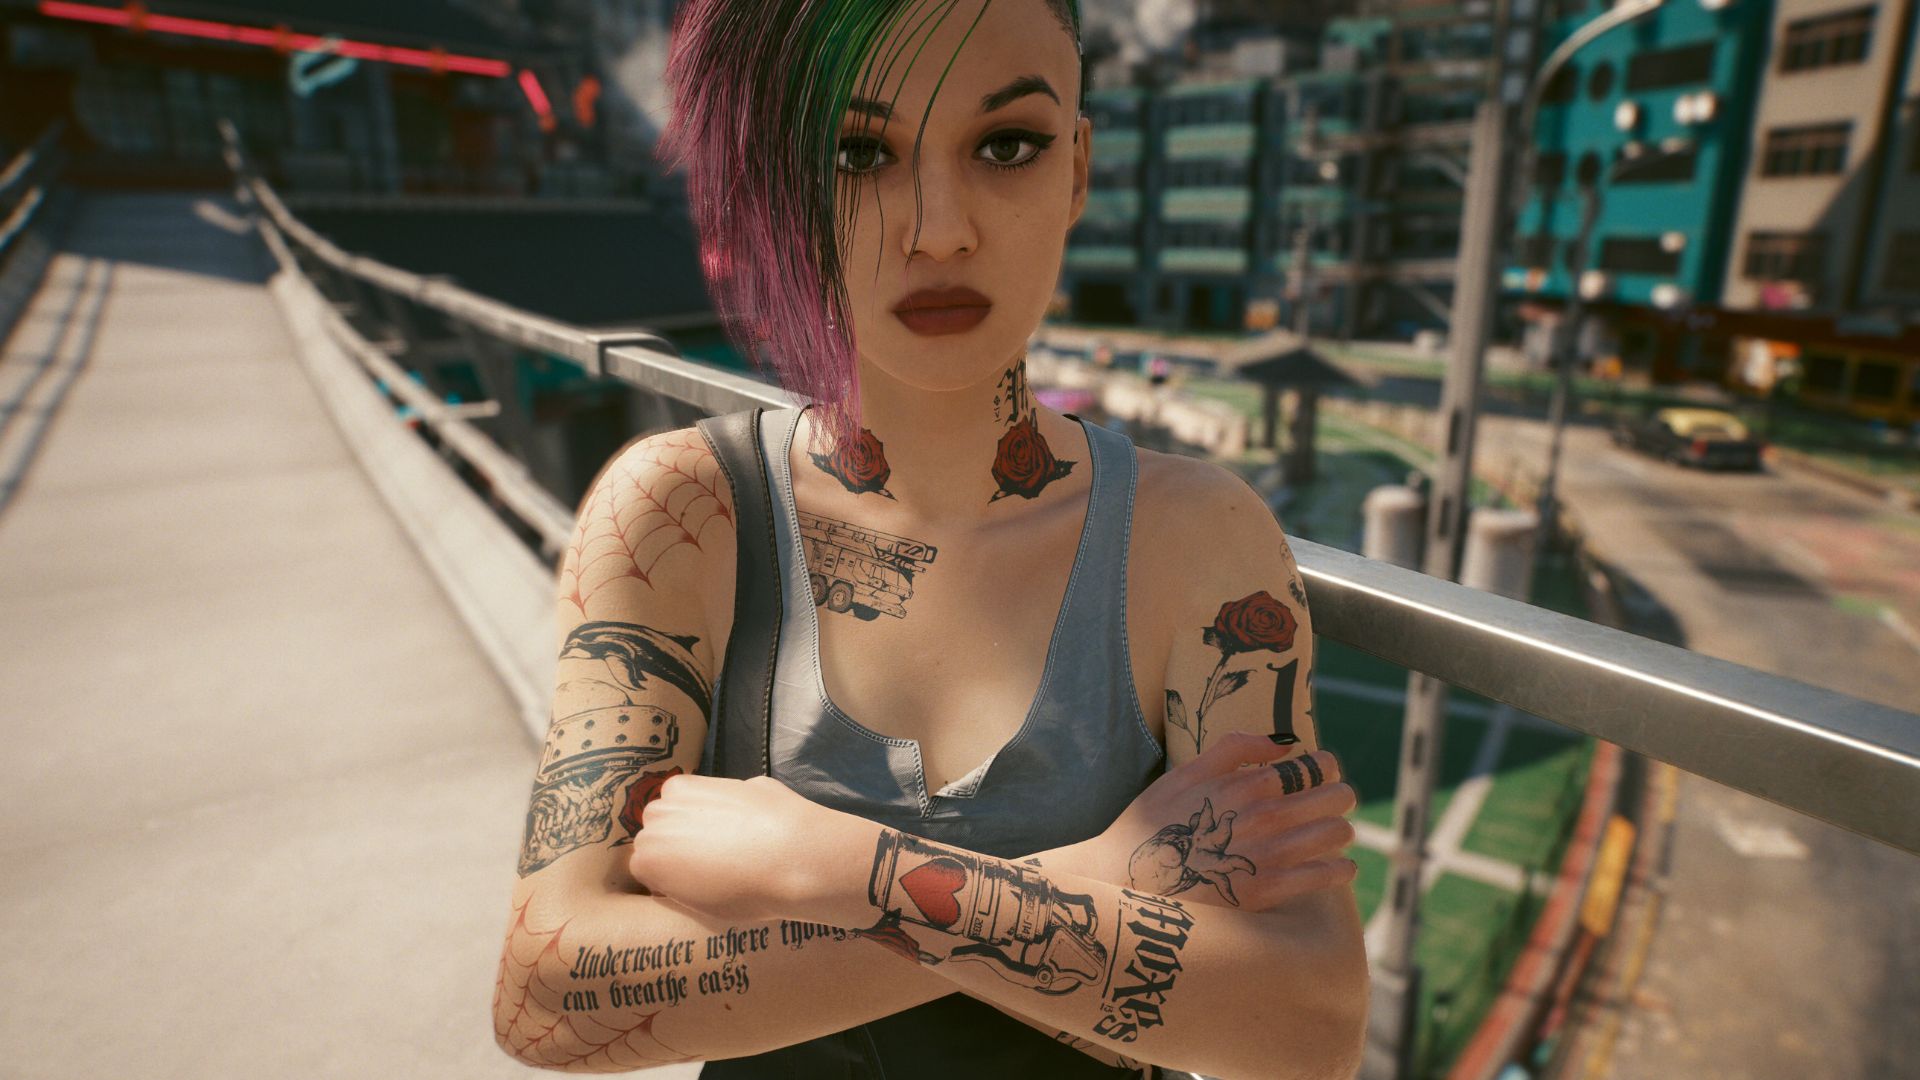 The best early Cyberpunk 2077 mods you can download right now